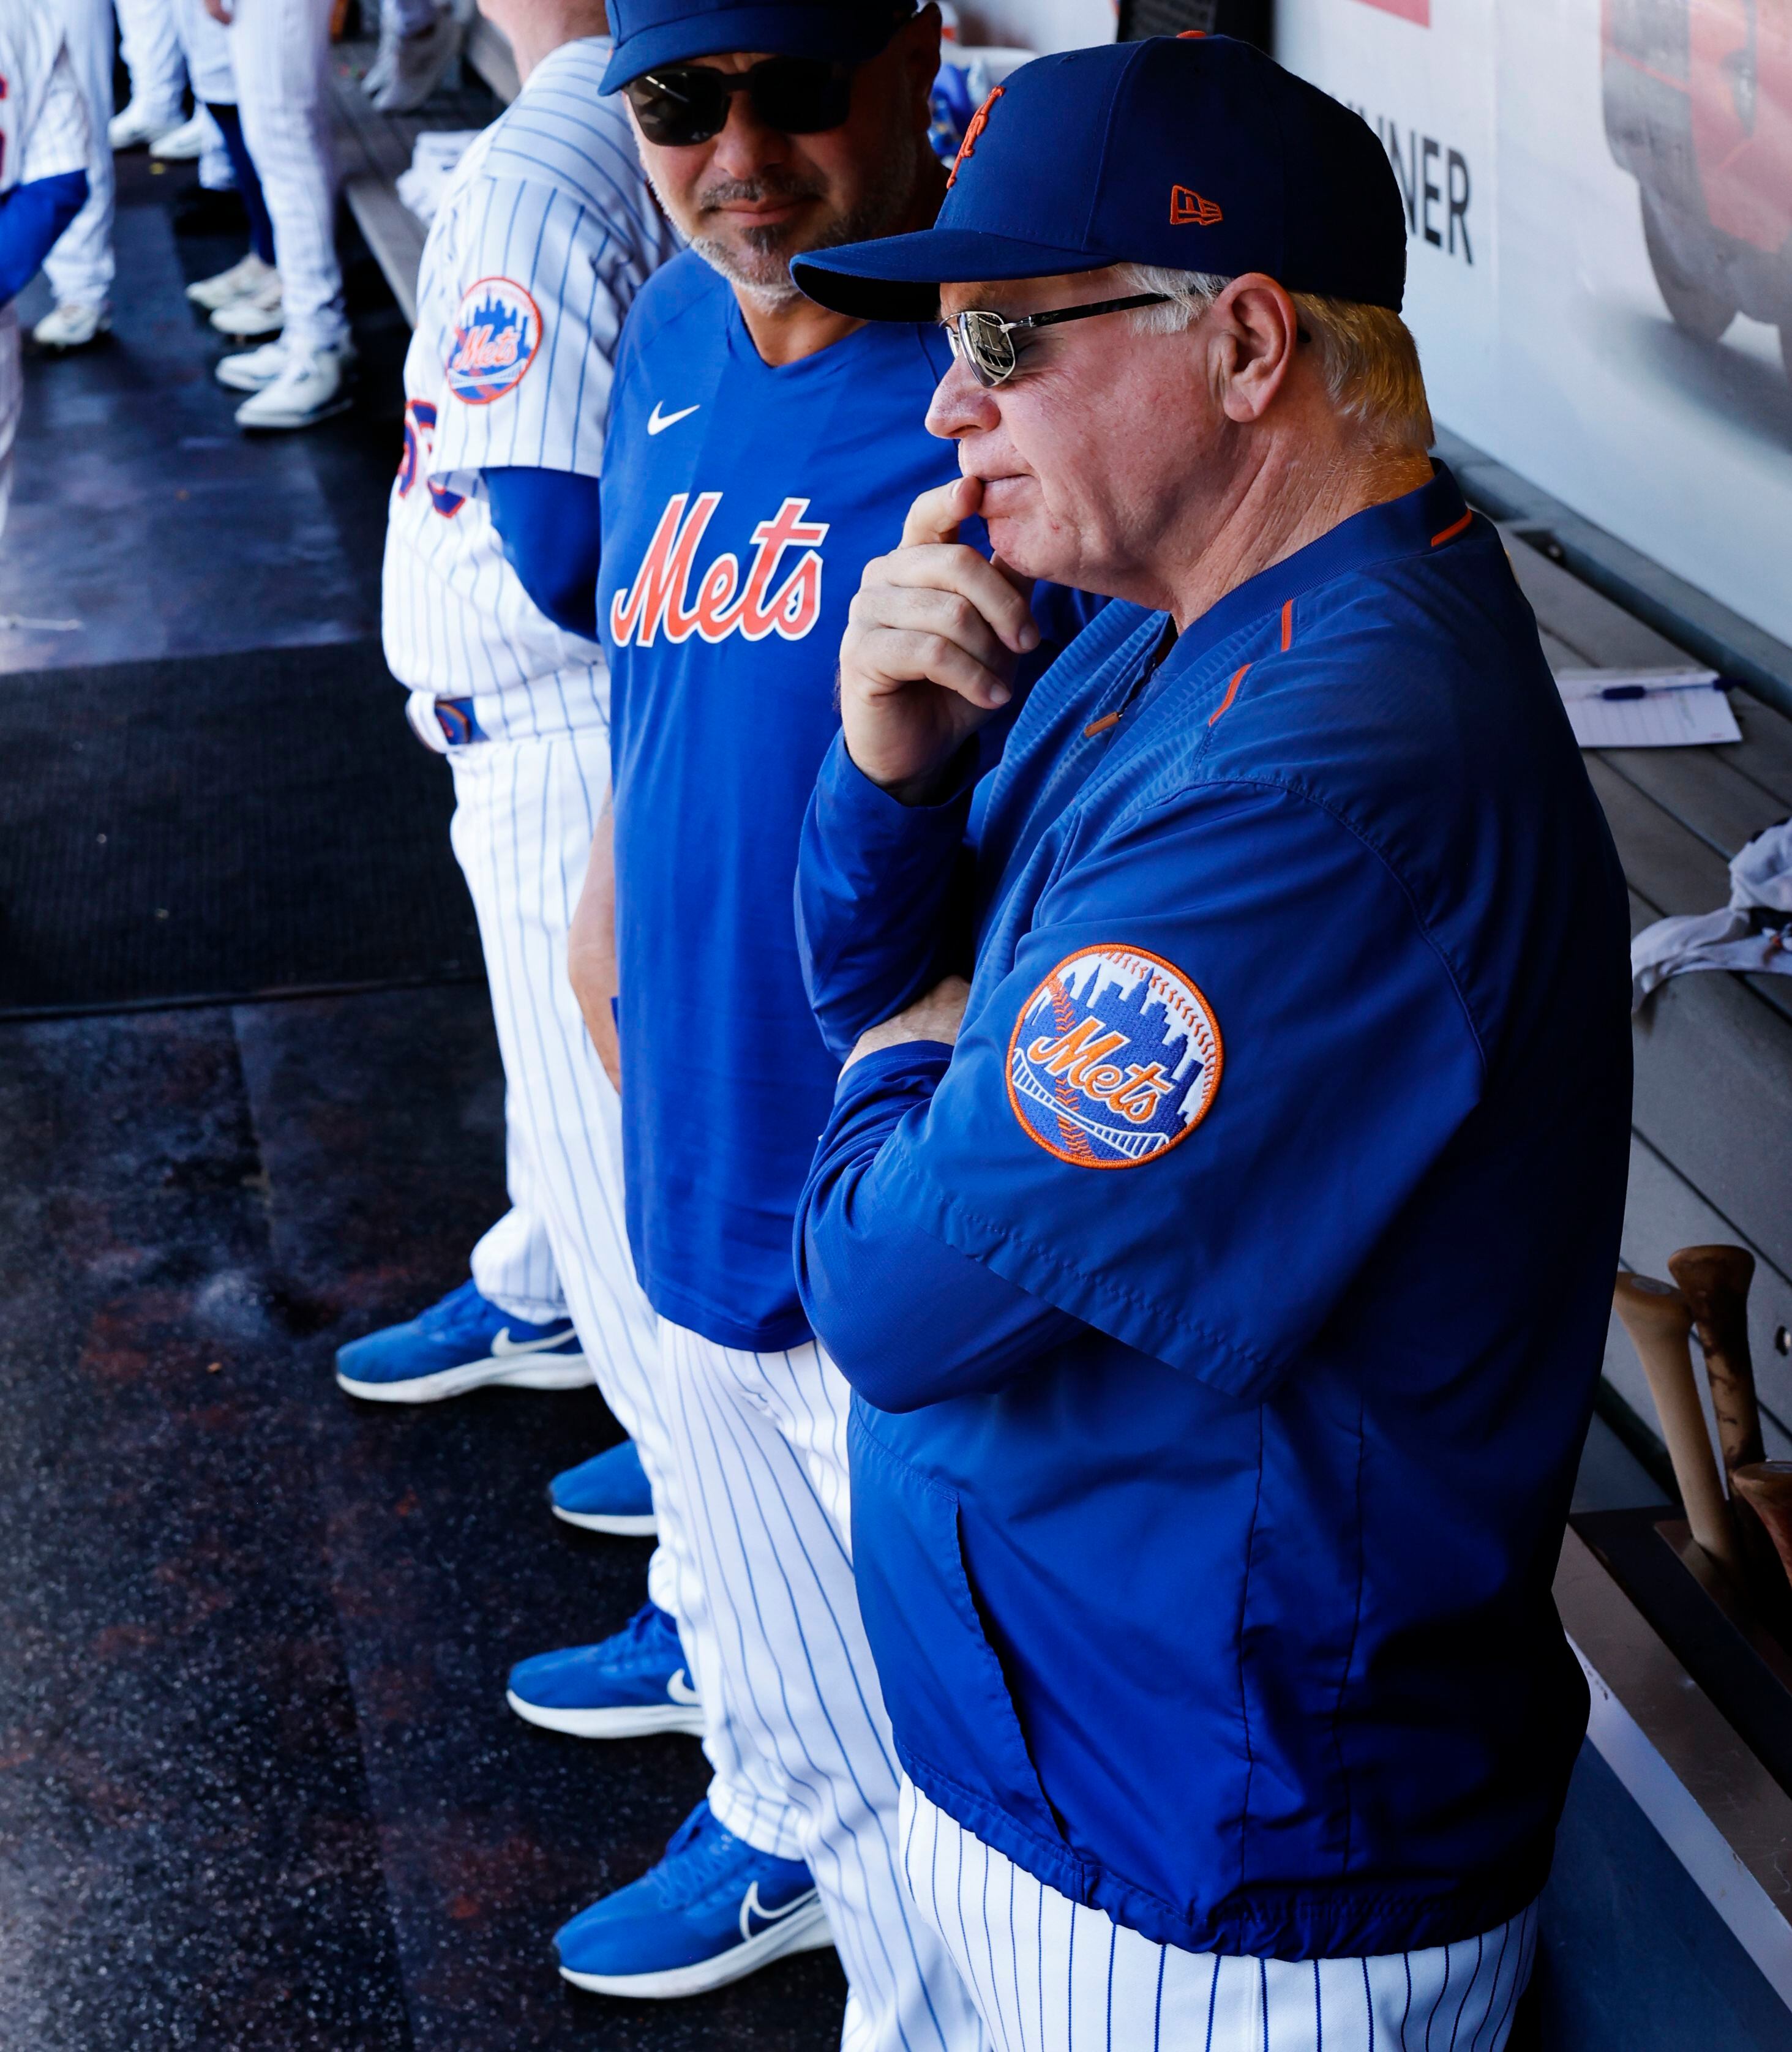 New York Mets manager Buck Showalter fired